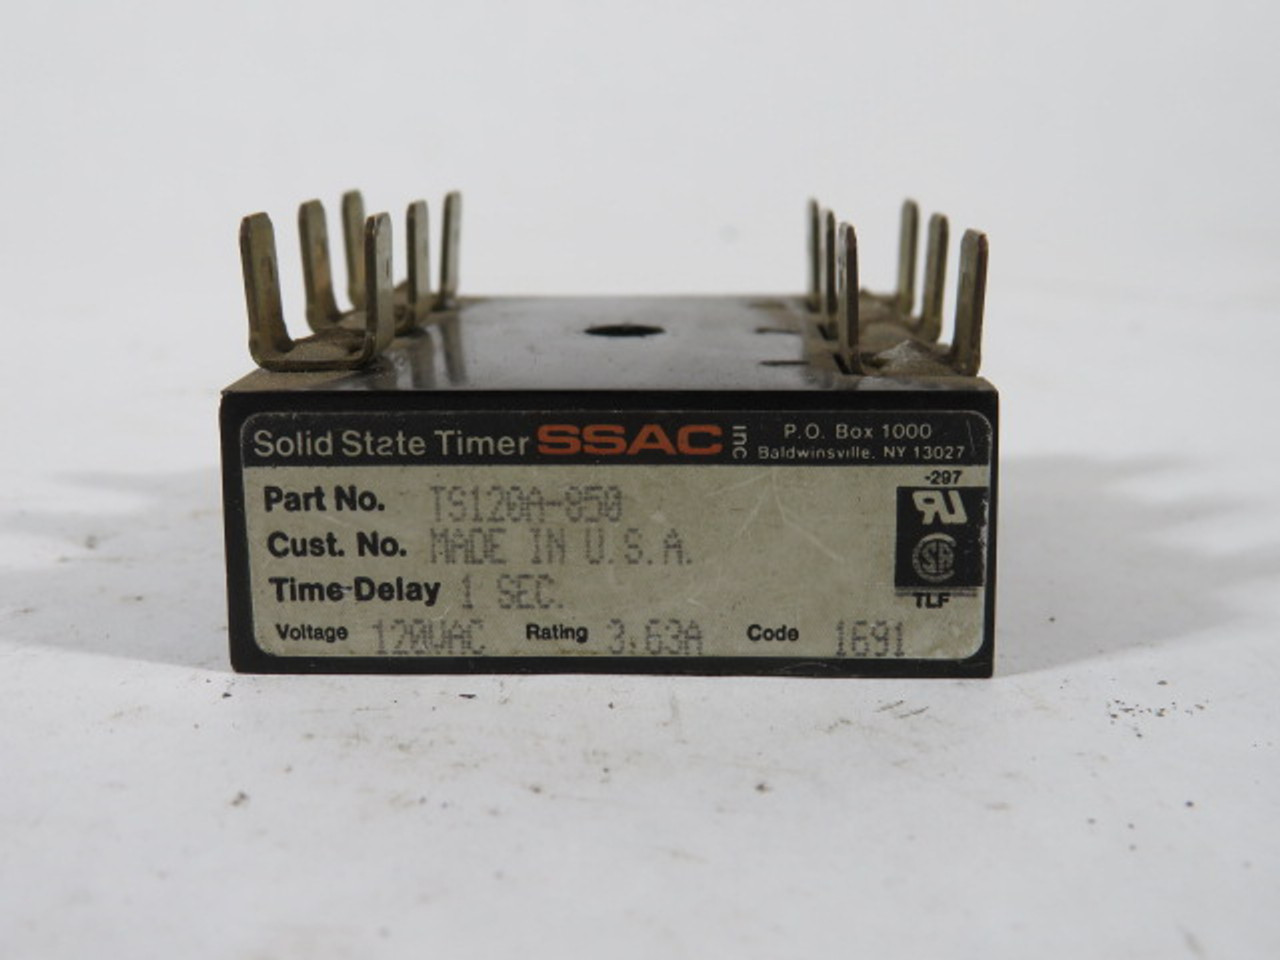 SSAC TS120A-850 Solid State Timer 1 Second Time Delay 120VAC USED